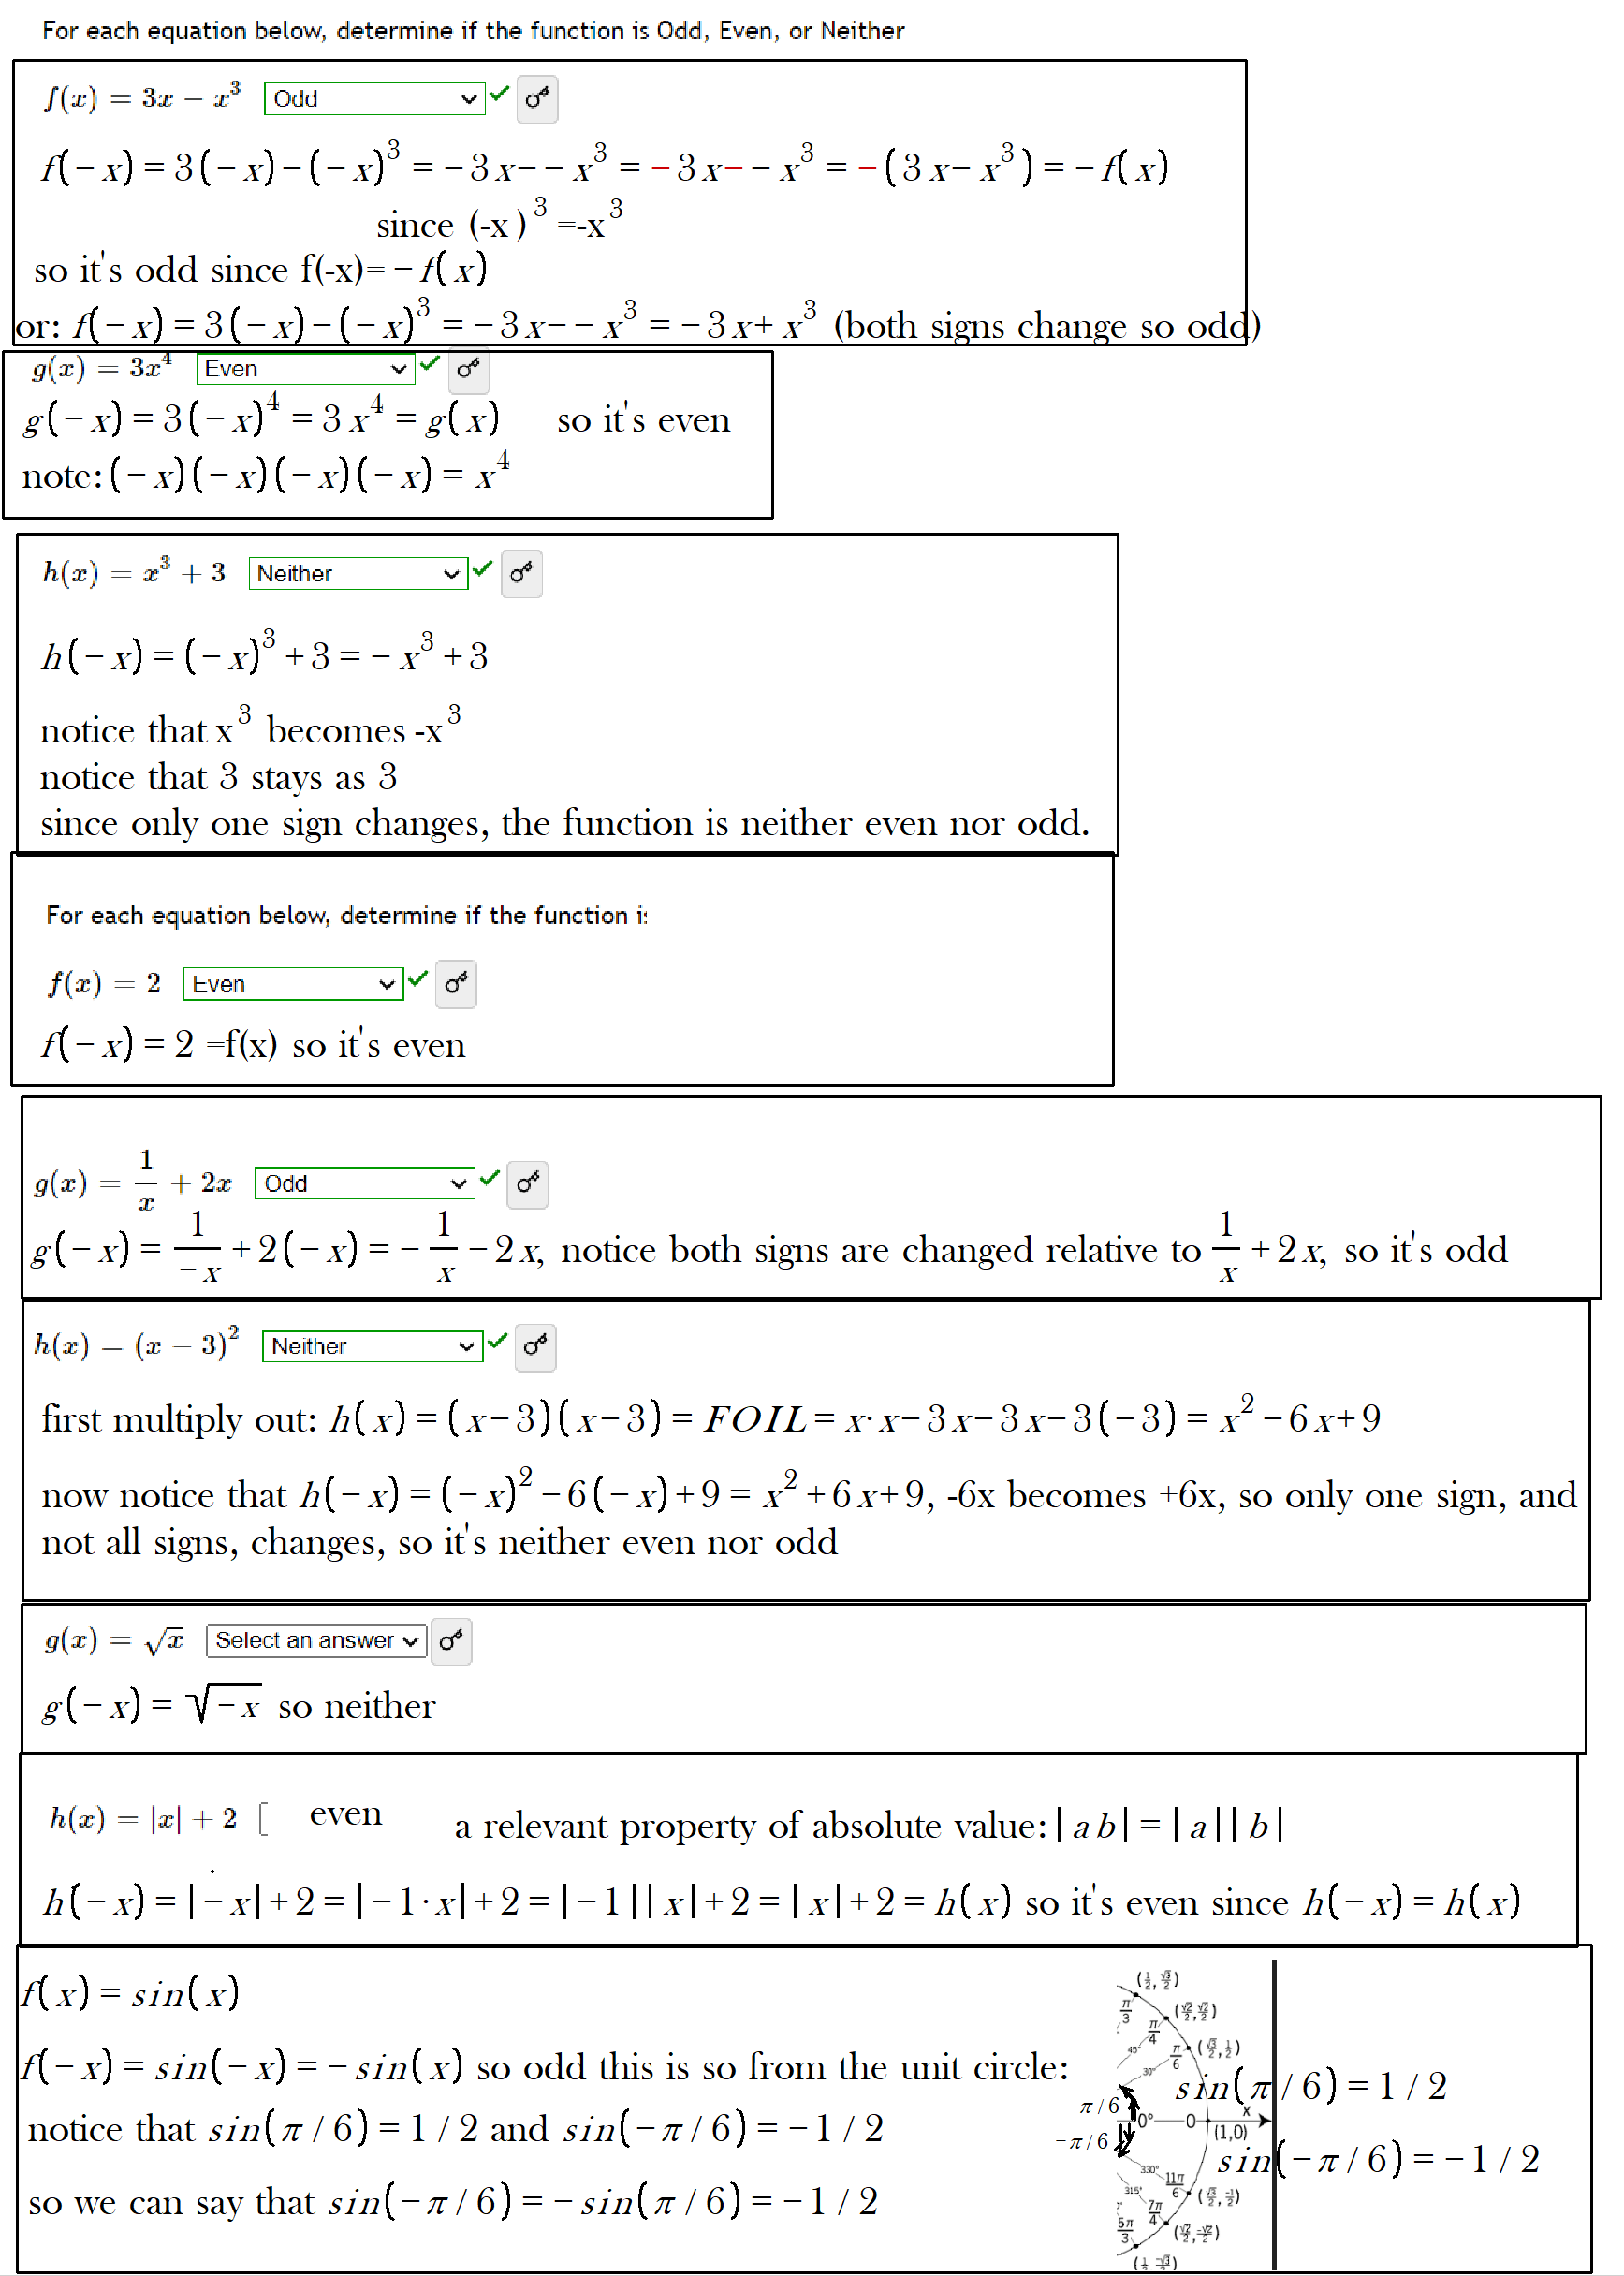 examples of checking whether a function is even odd or neither